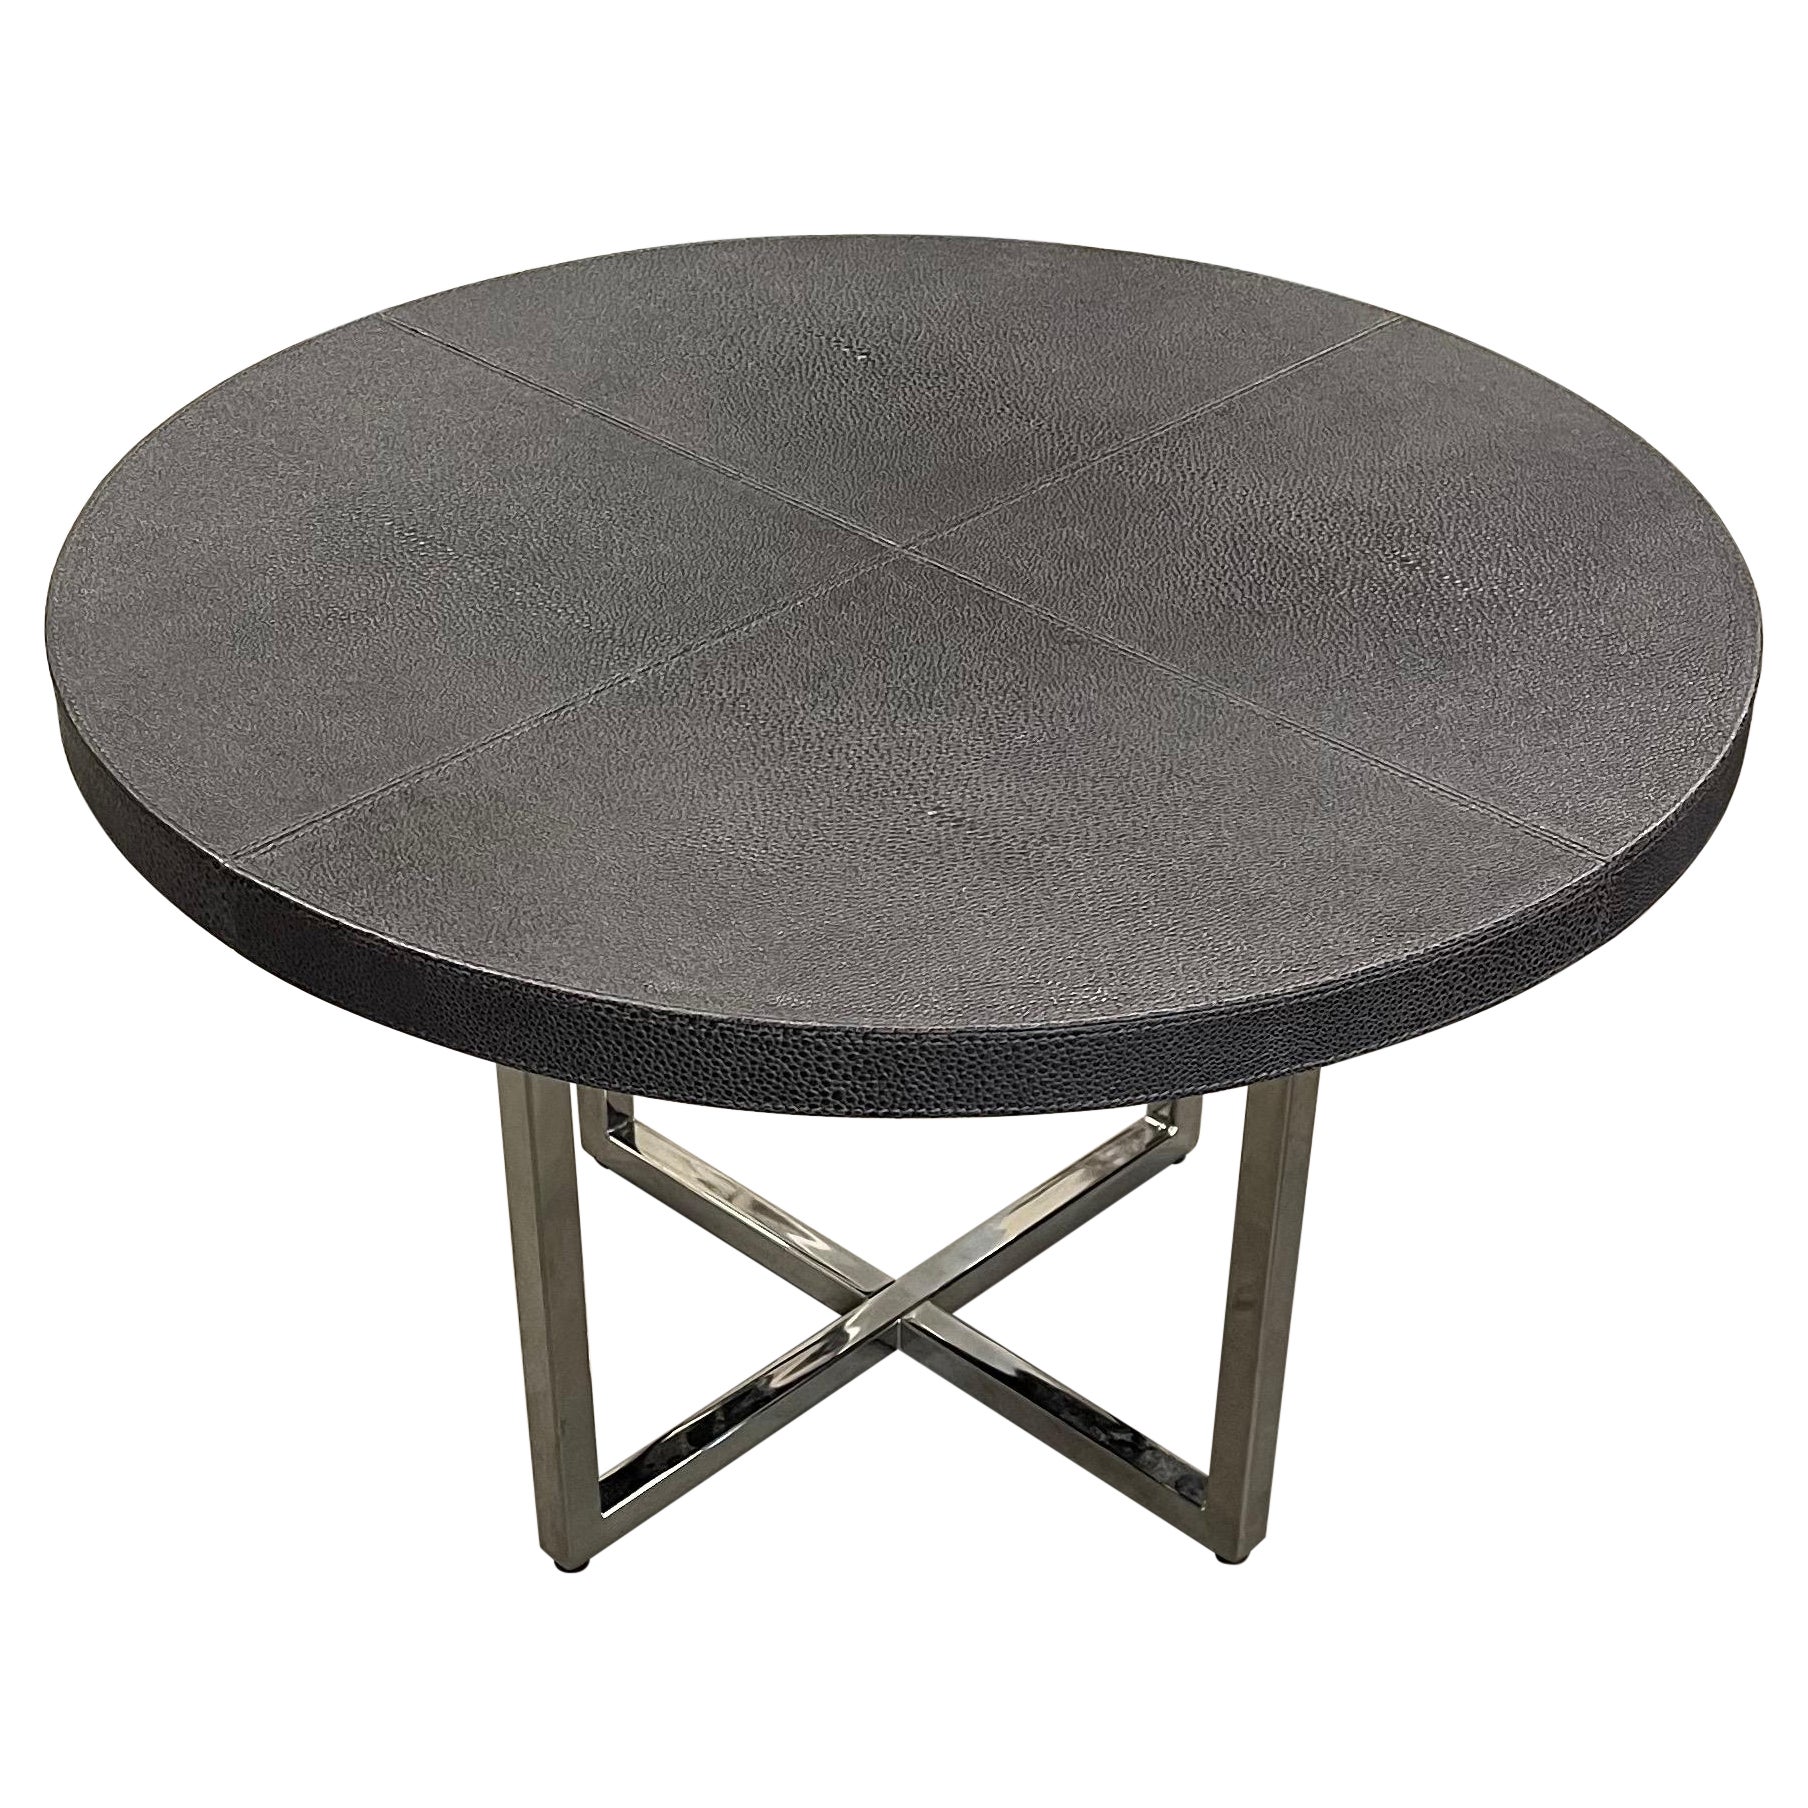 Fendi Casa Shagreen Leather Top Table For Sale